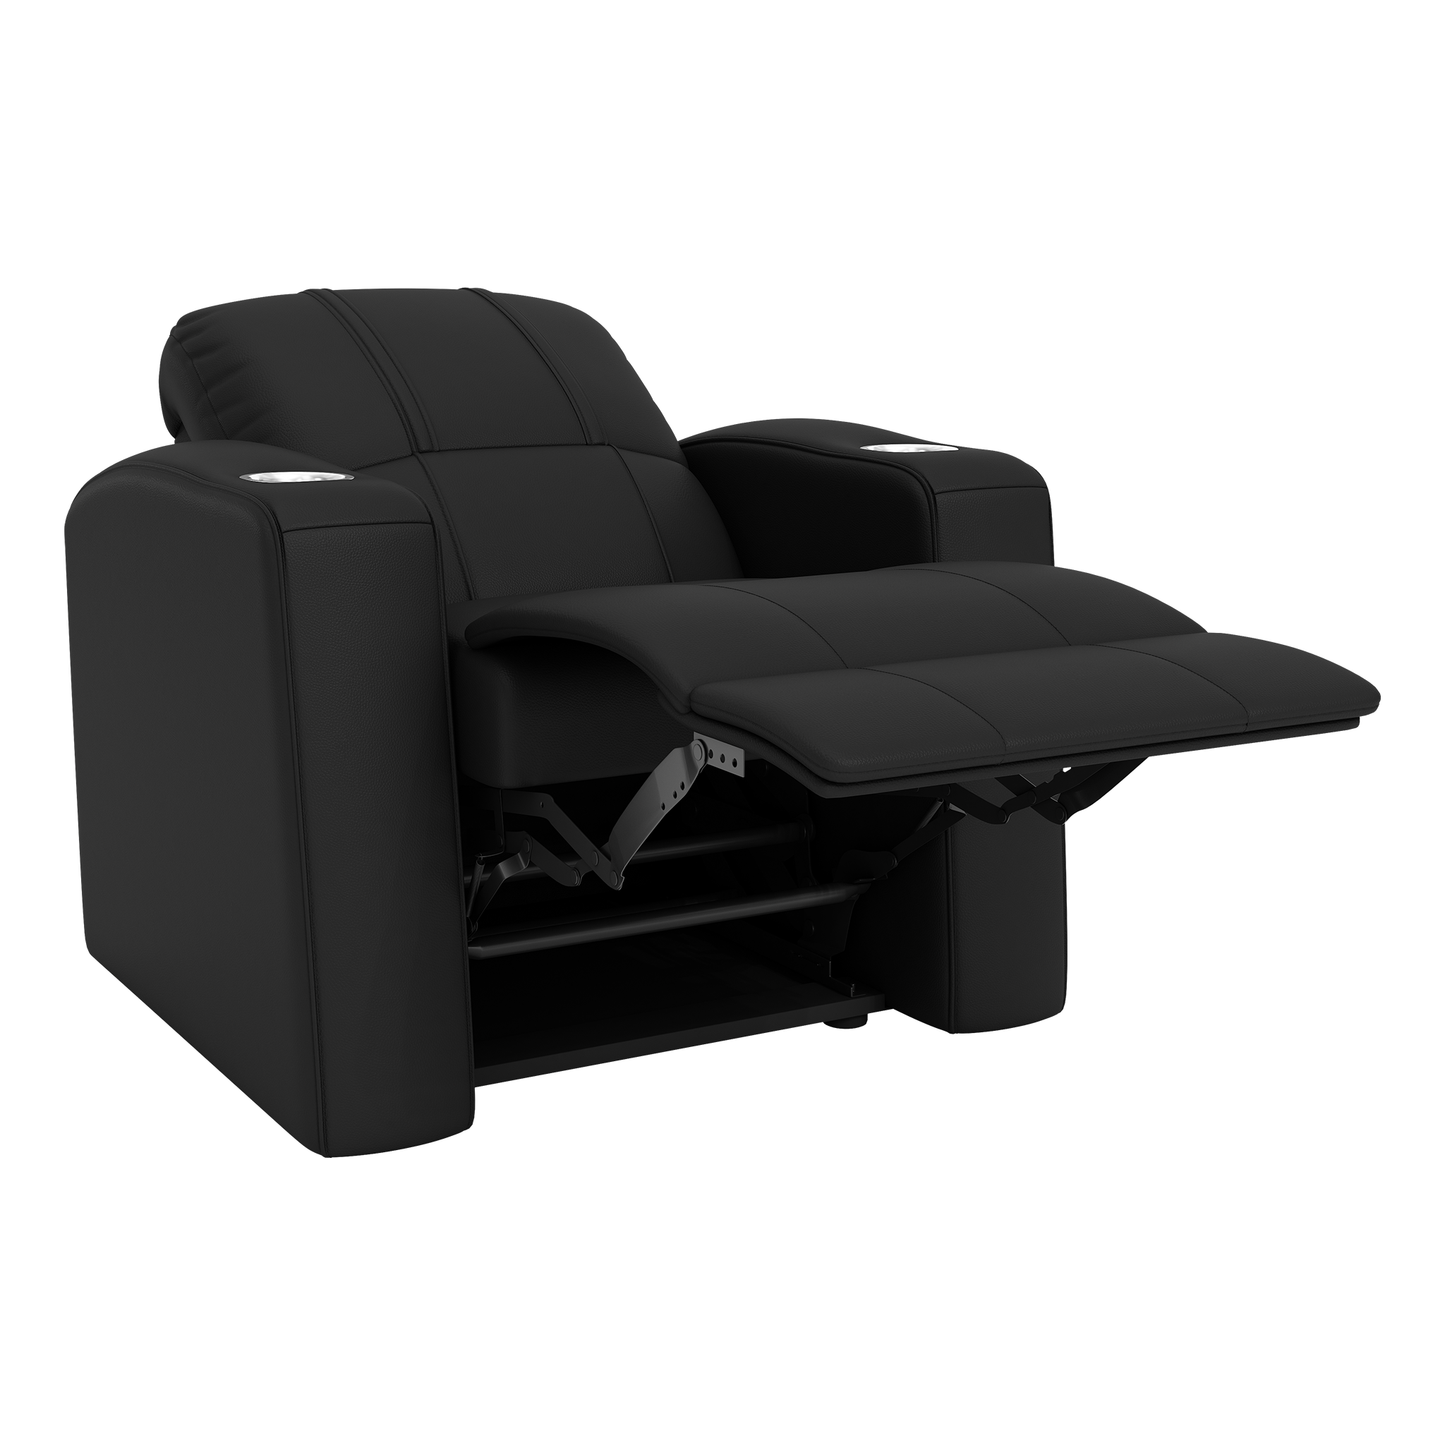 Relax Home Theater Recliner with Nashville SC Secondary Logo